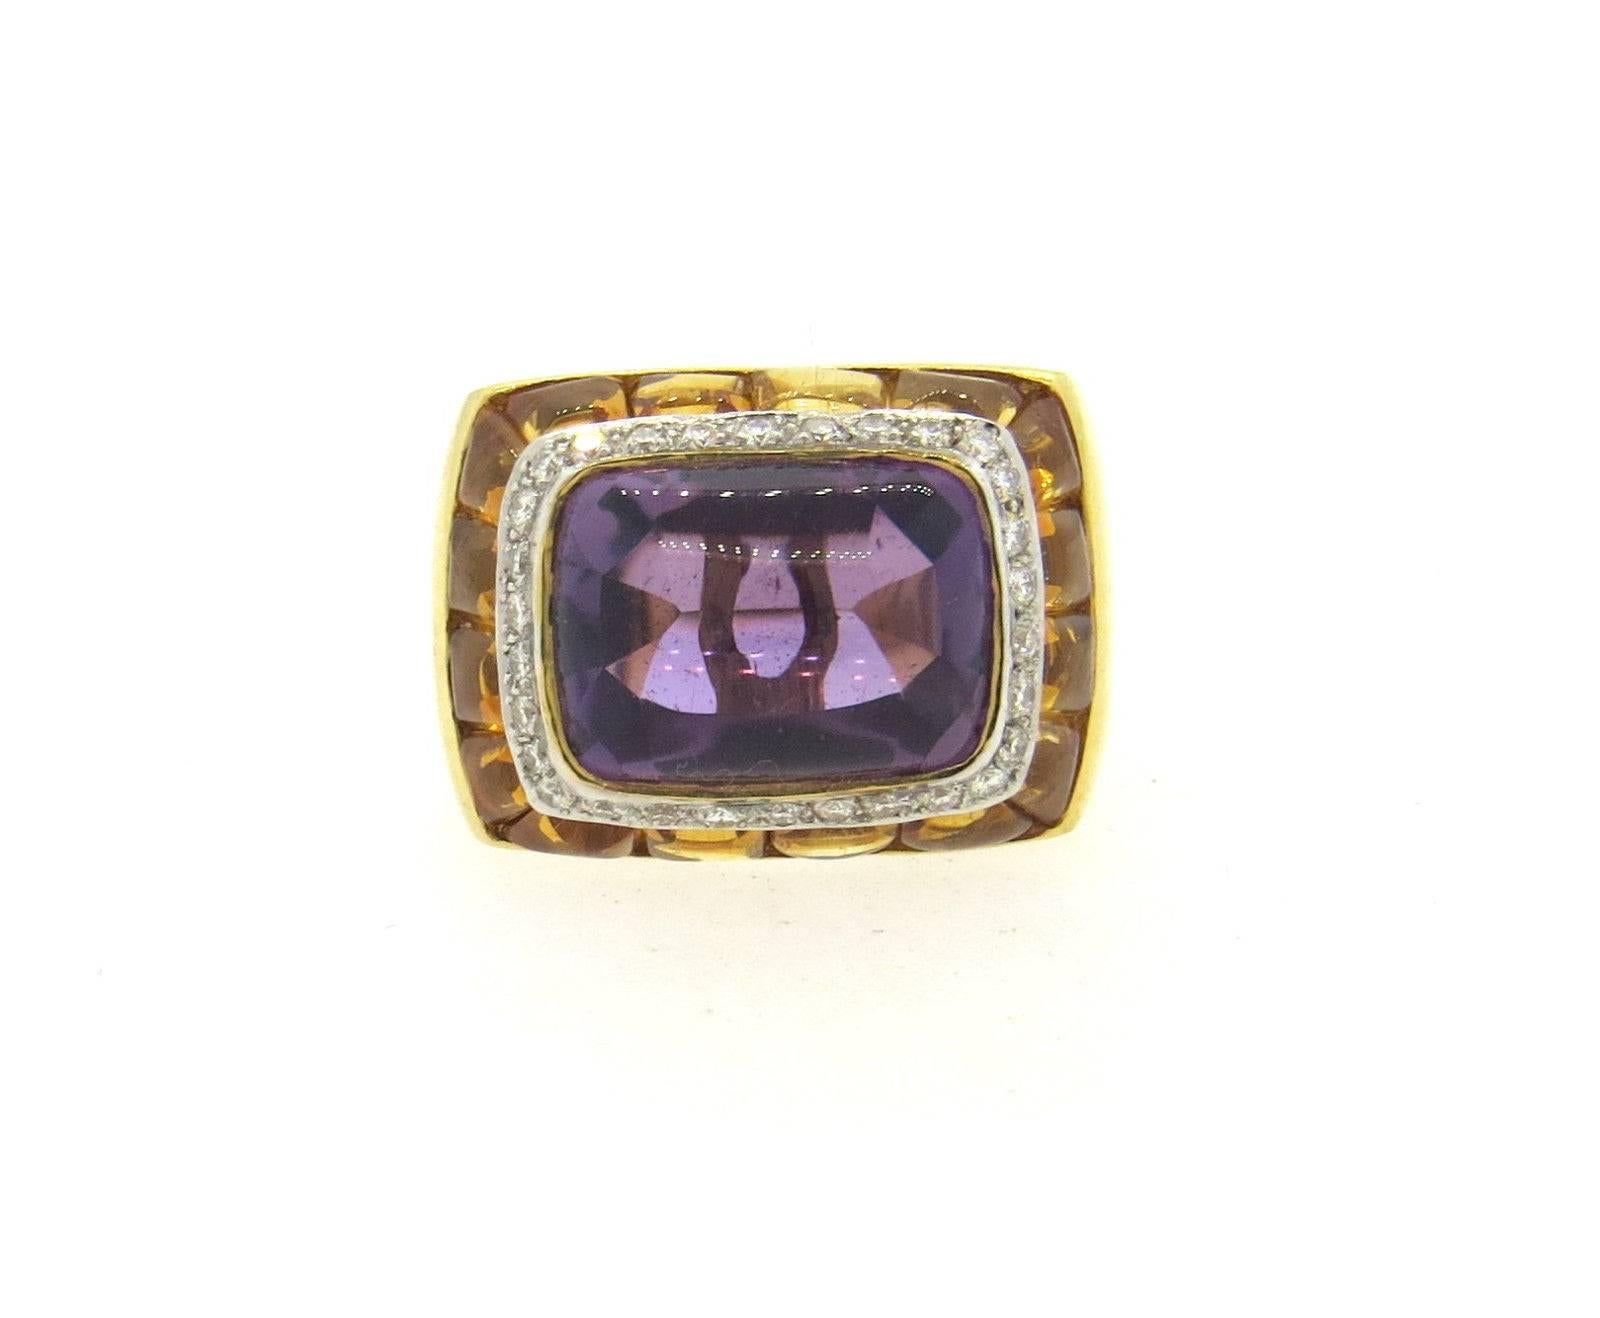 An 18k yellow gold cocktail ring set with amethyst, sugarloaf citrines, and approximately 0.30ctw of G/VS diamonds.  The ring is a size 6, ring top measures 15mm x 21mm.  The weight of the ring was 15.6 grams.